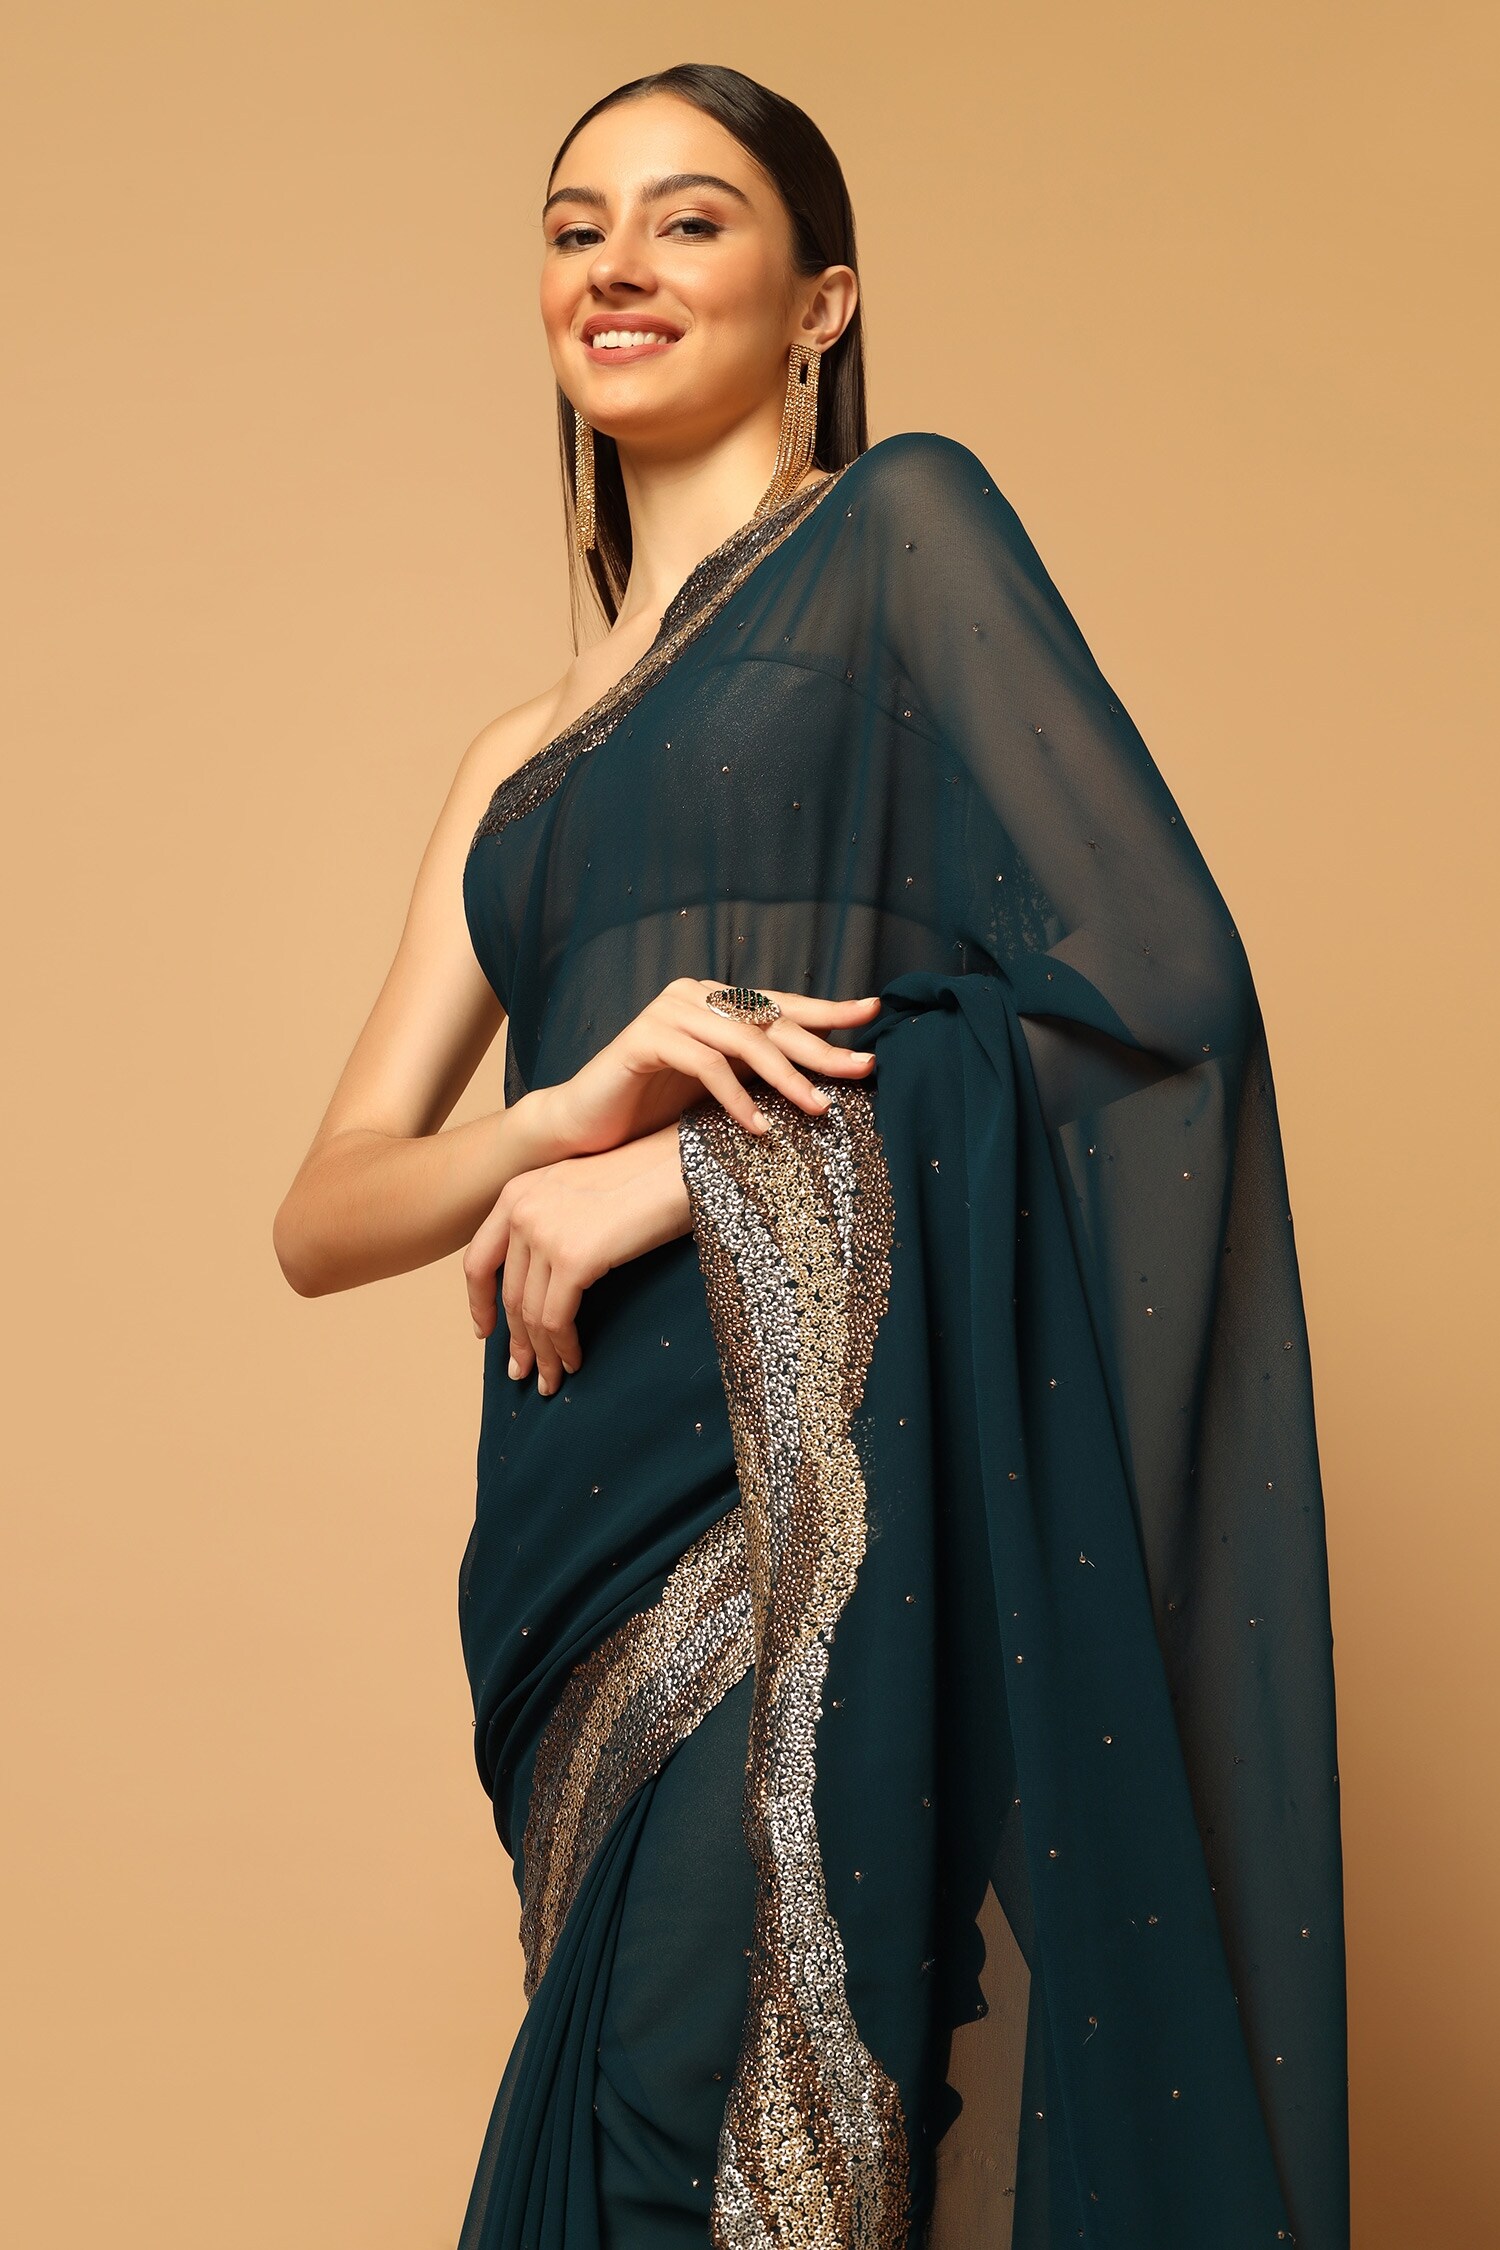 Aza - Here's to feminity with a modern twist! A saree overlayed